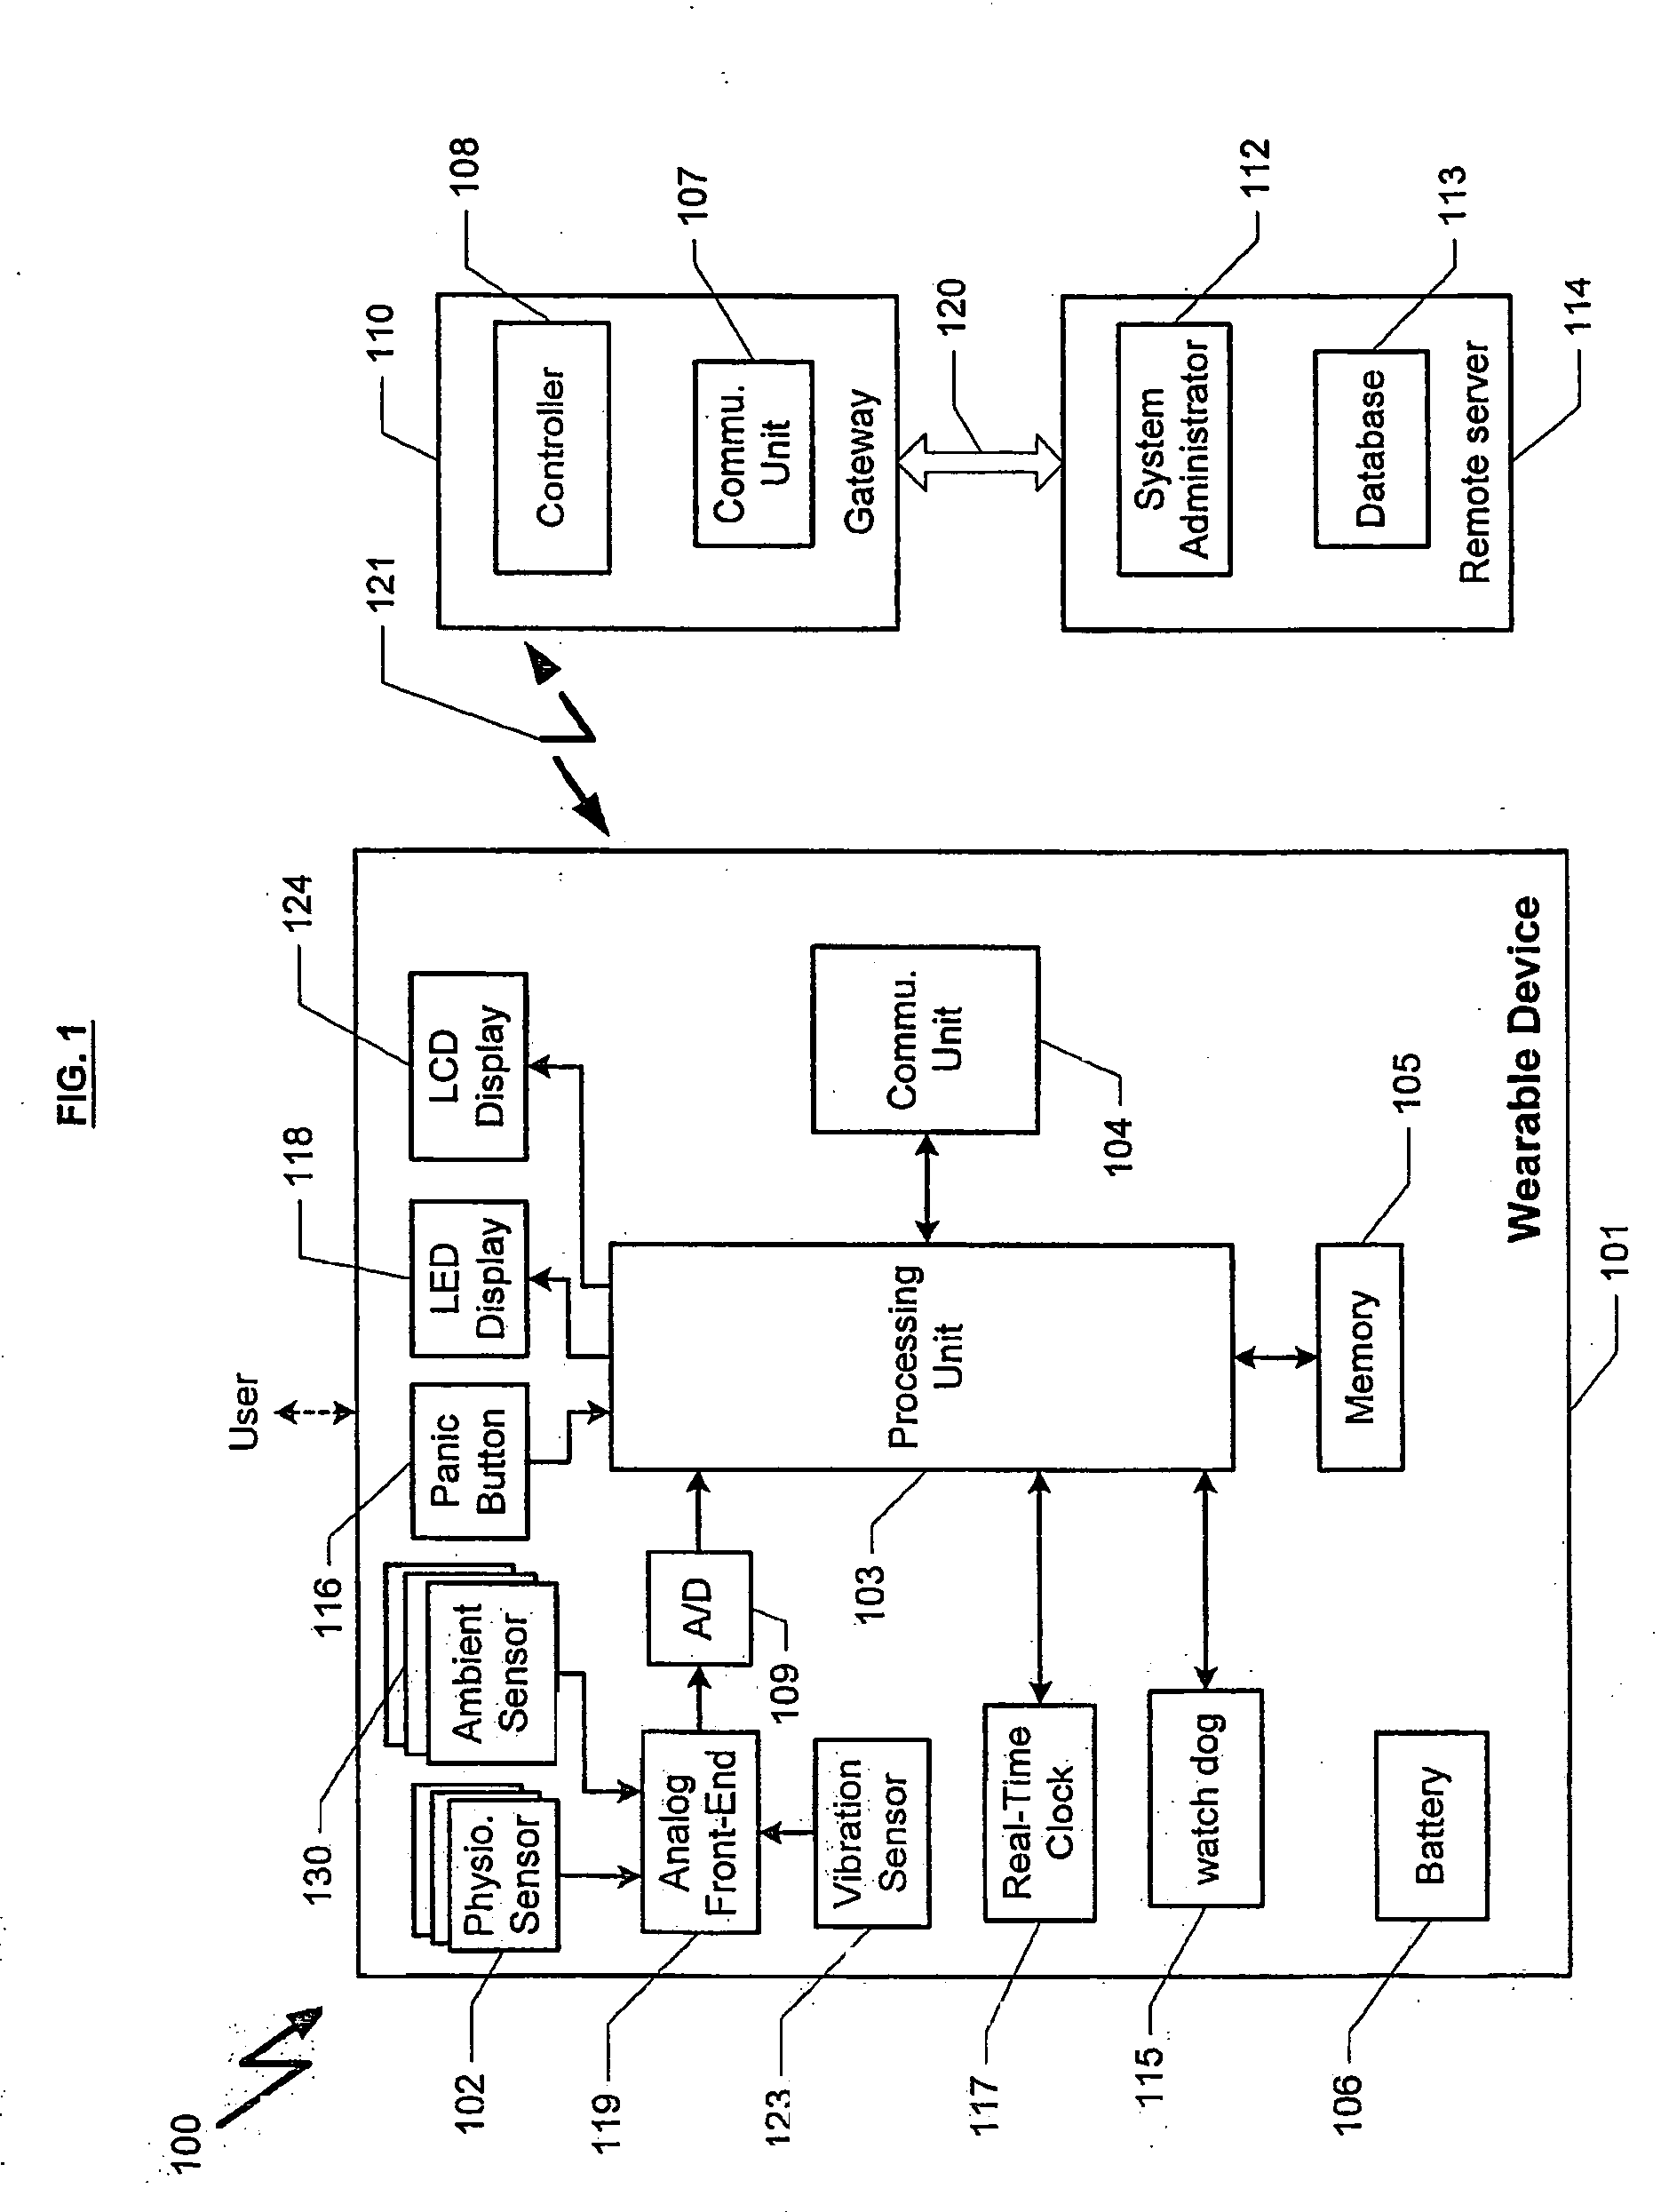 Method and device for measuring physiological parameters at the wrist